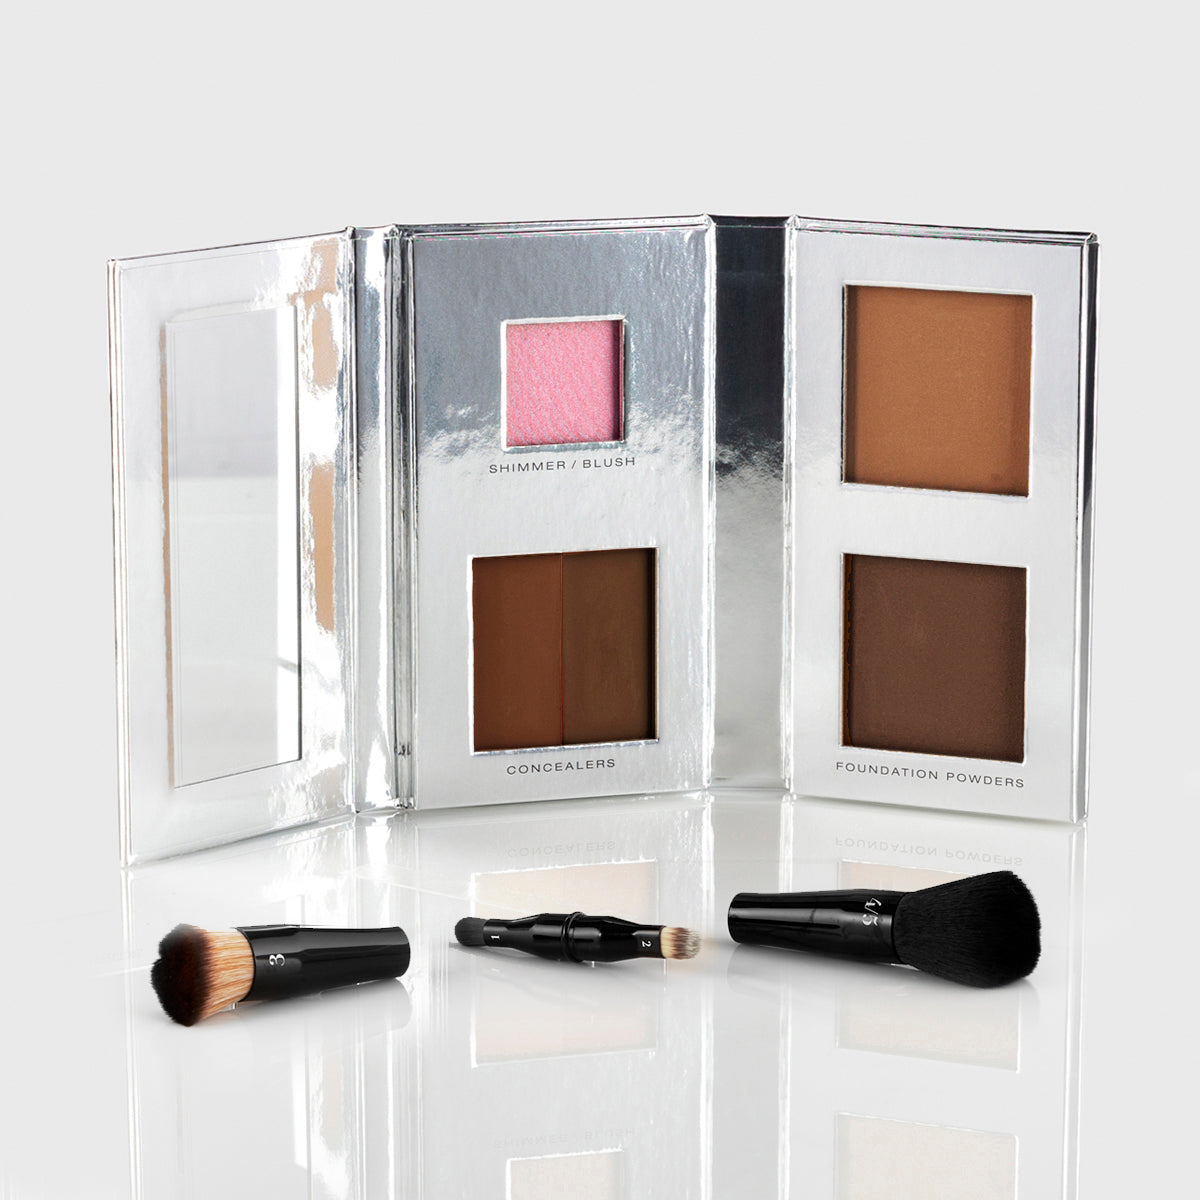 a silver makeup palette with mirrored flap and 1 blush, 2 concealers and 2 foundation powers in deep shades; a black, travel-sized nesting brush set is splayed out in front of the palette